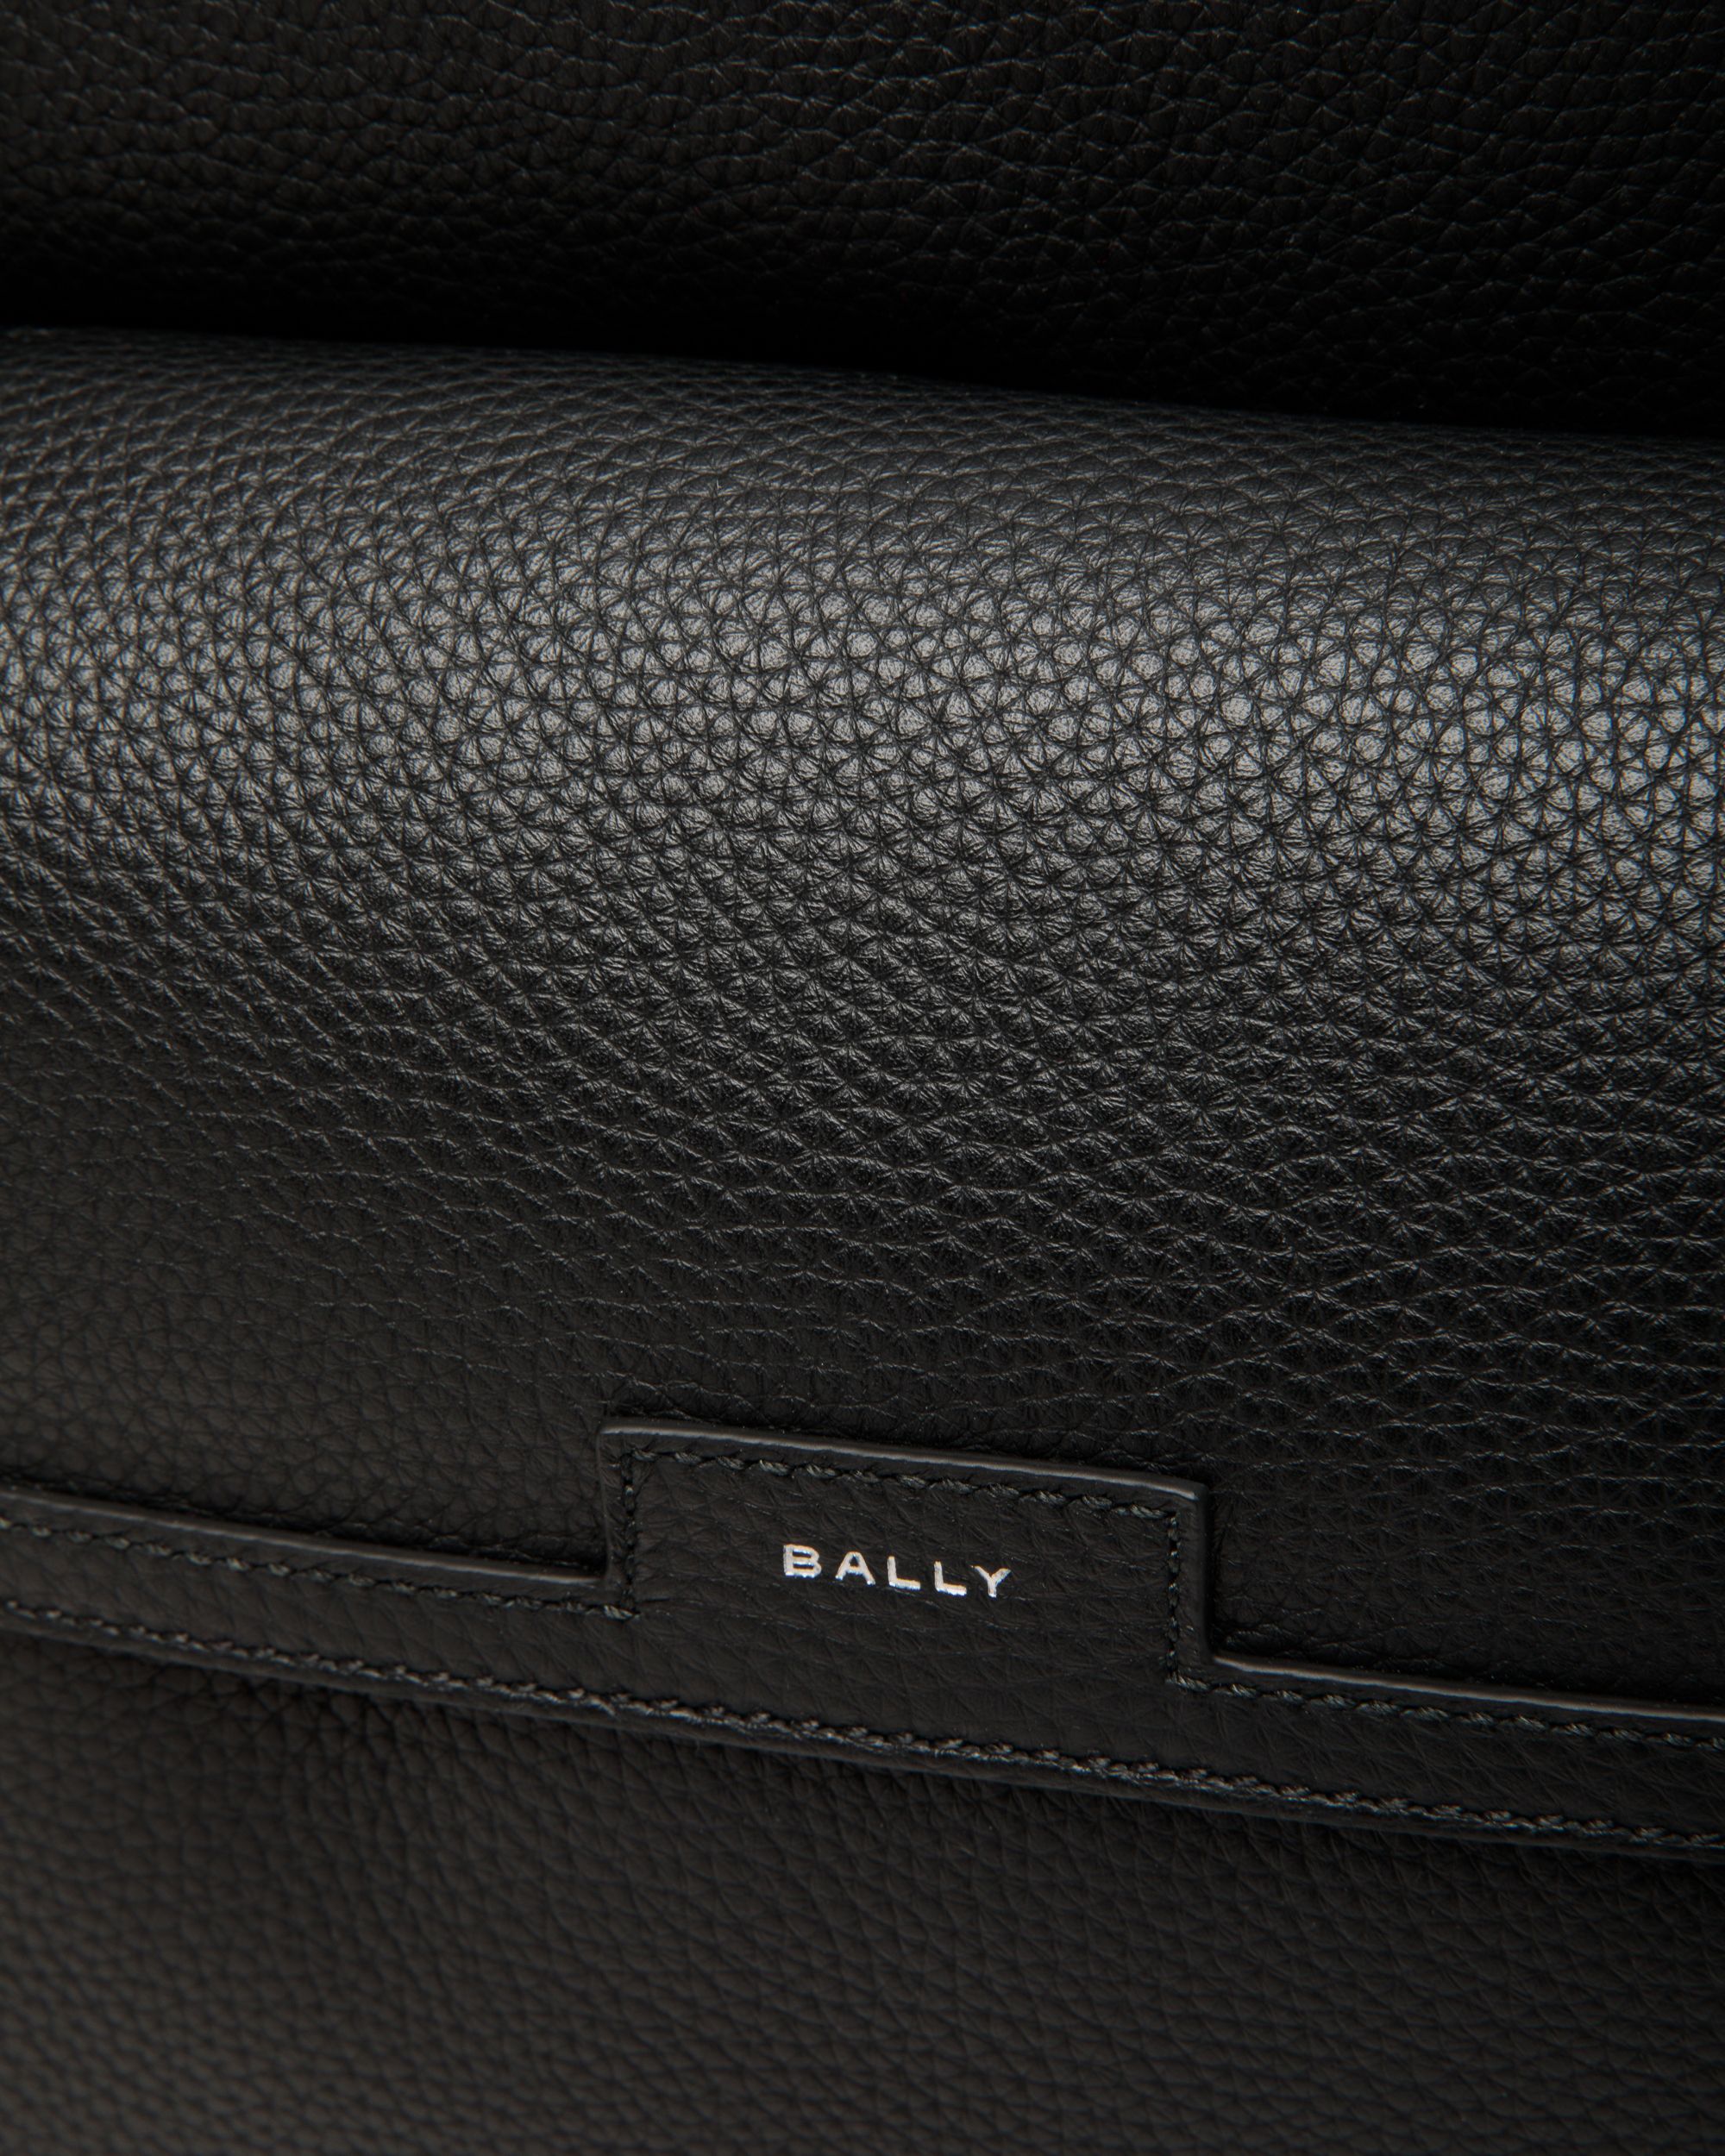 Code | Men's Backpack in Black Grained Leather | Bally | Still Life Detail